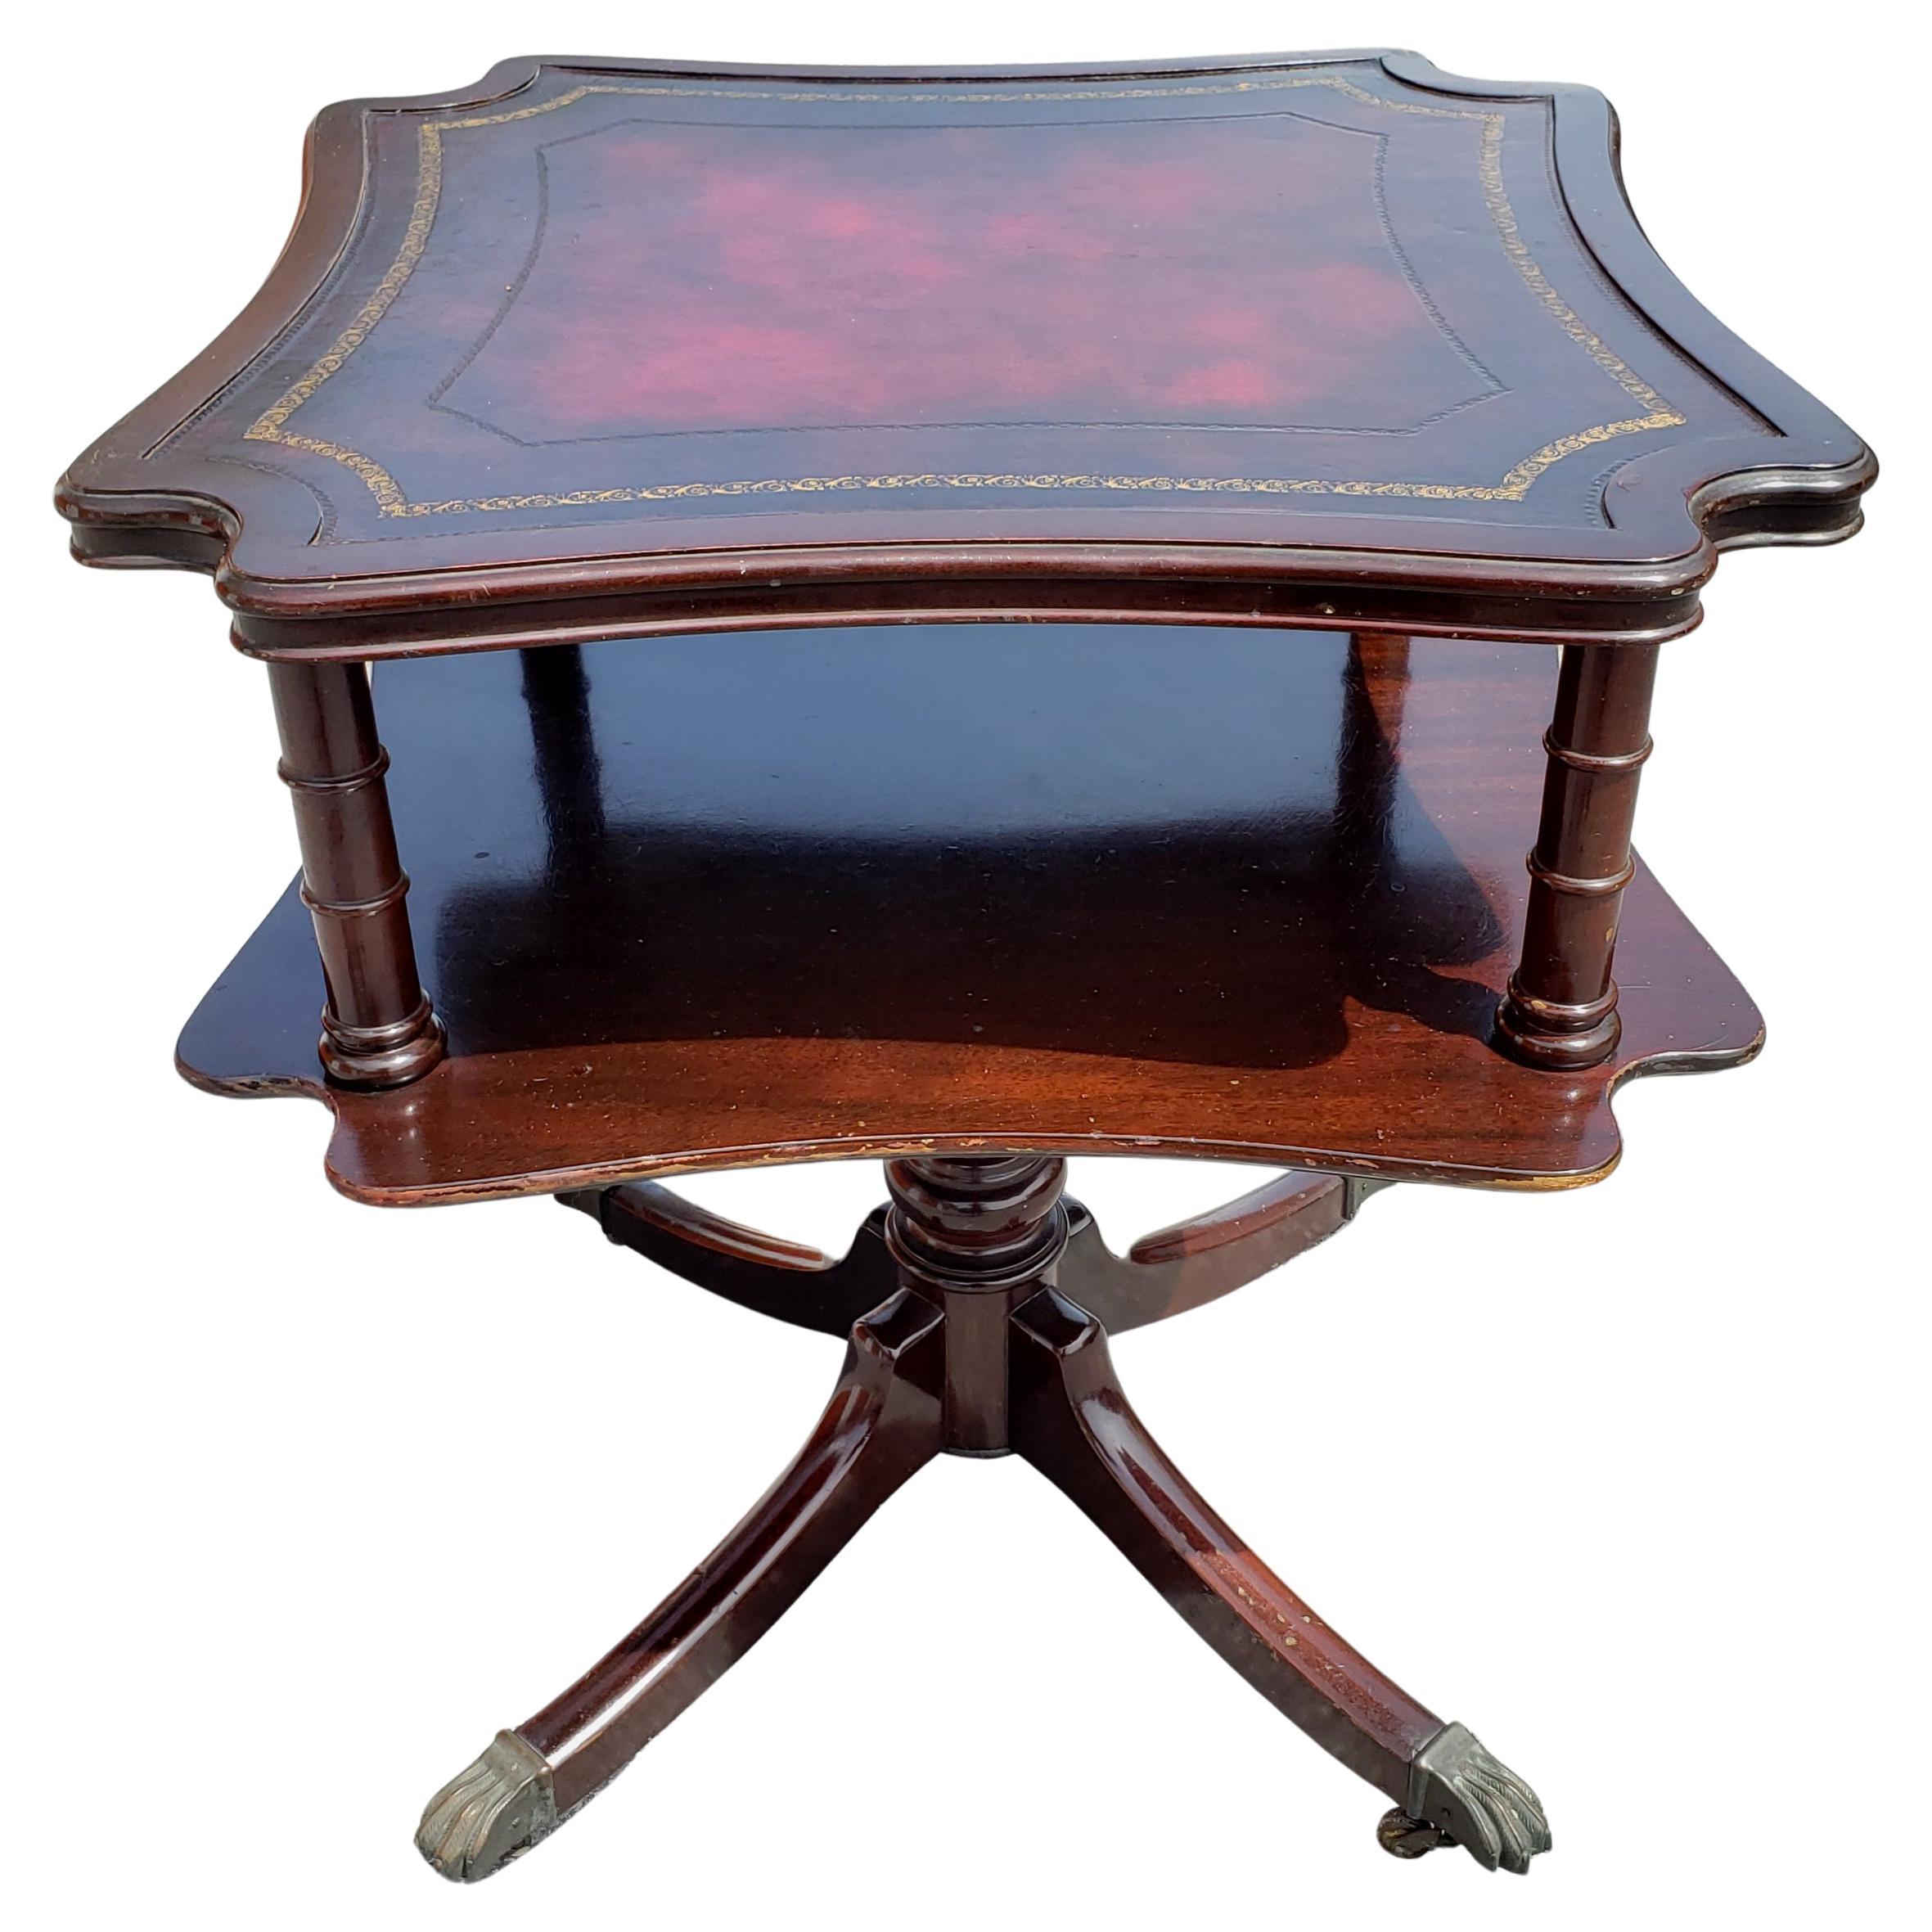 20th Century French Regency Style Two-Tier Red Leather Top Mahogany Tea Table For Sale